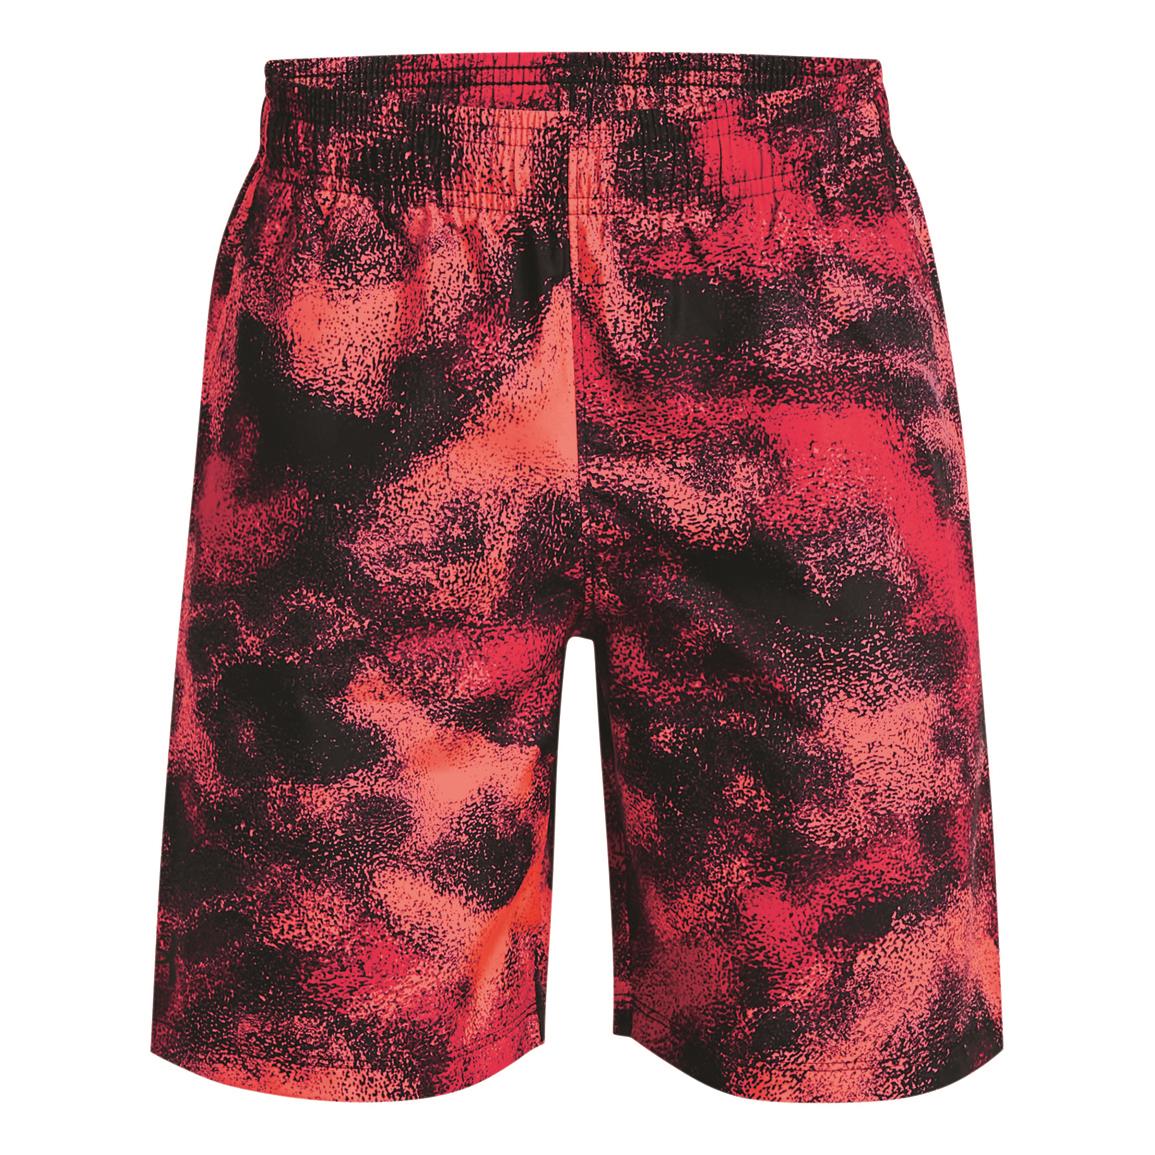 Under Armour Youth Woven Printed Shorts, Black/after Burn/black